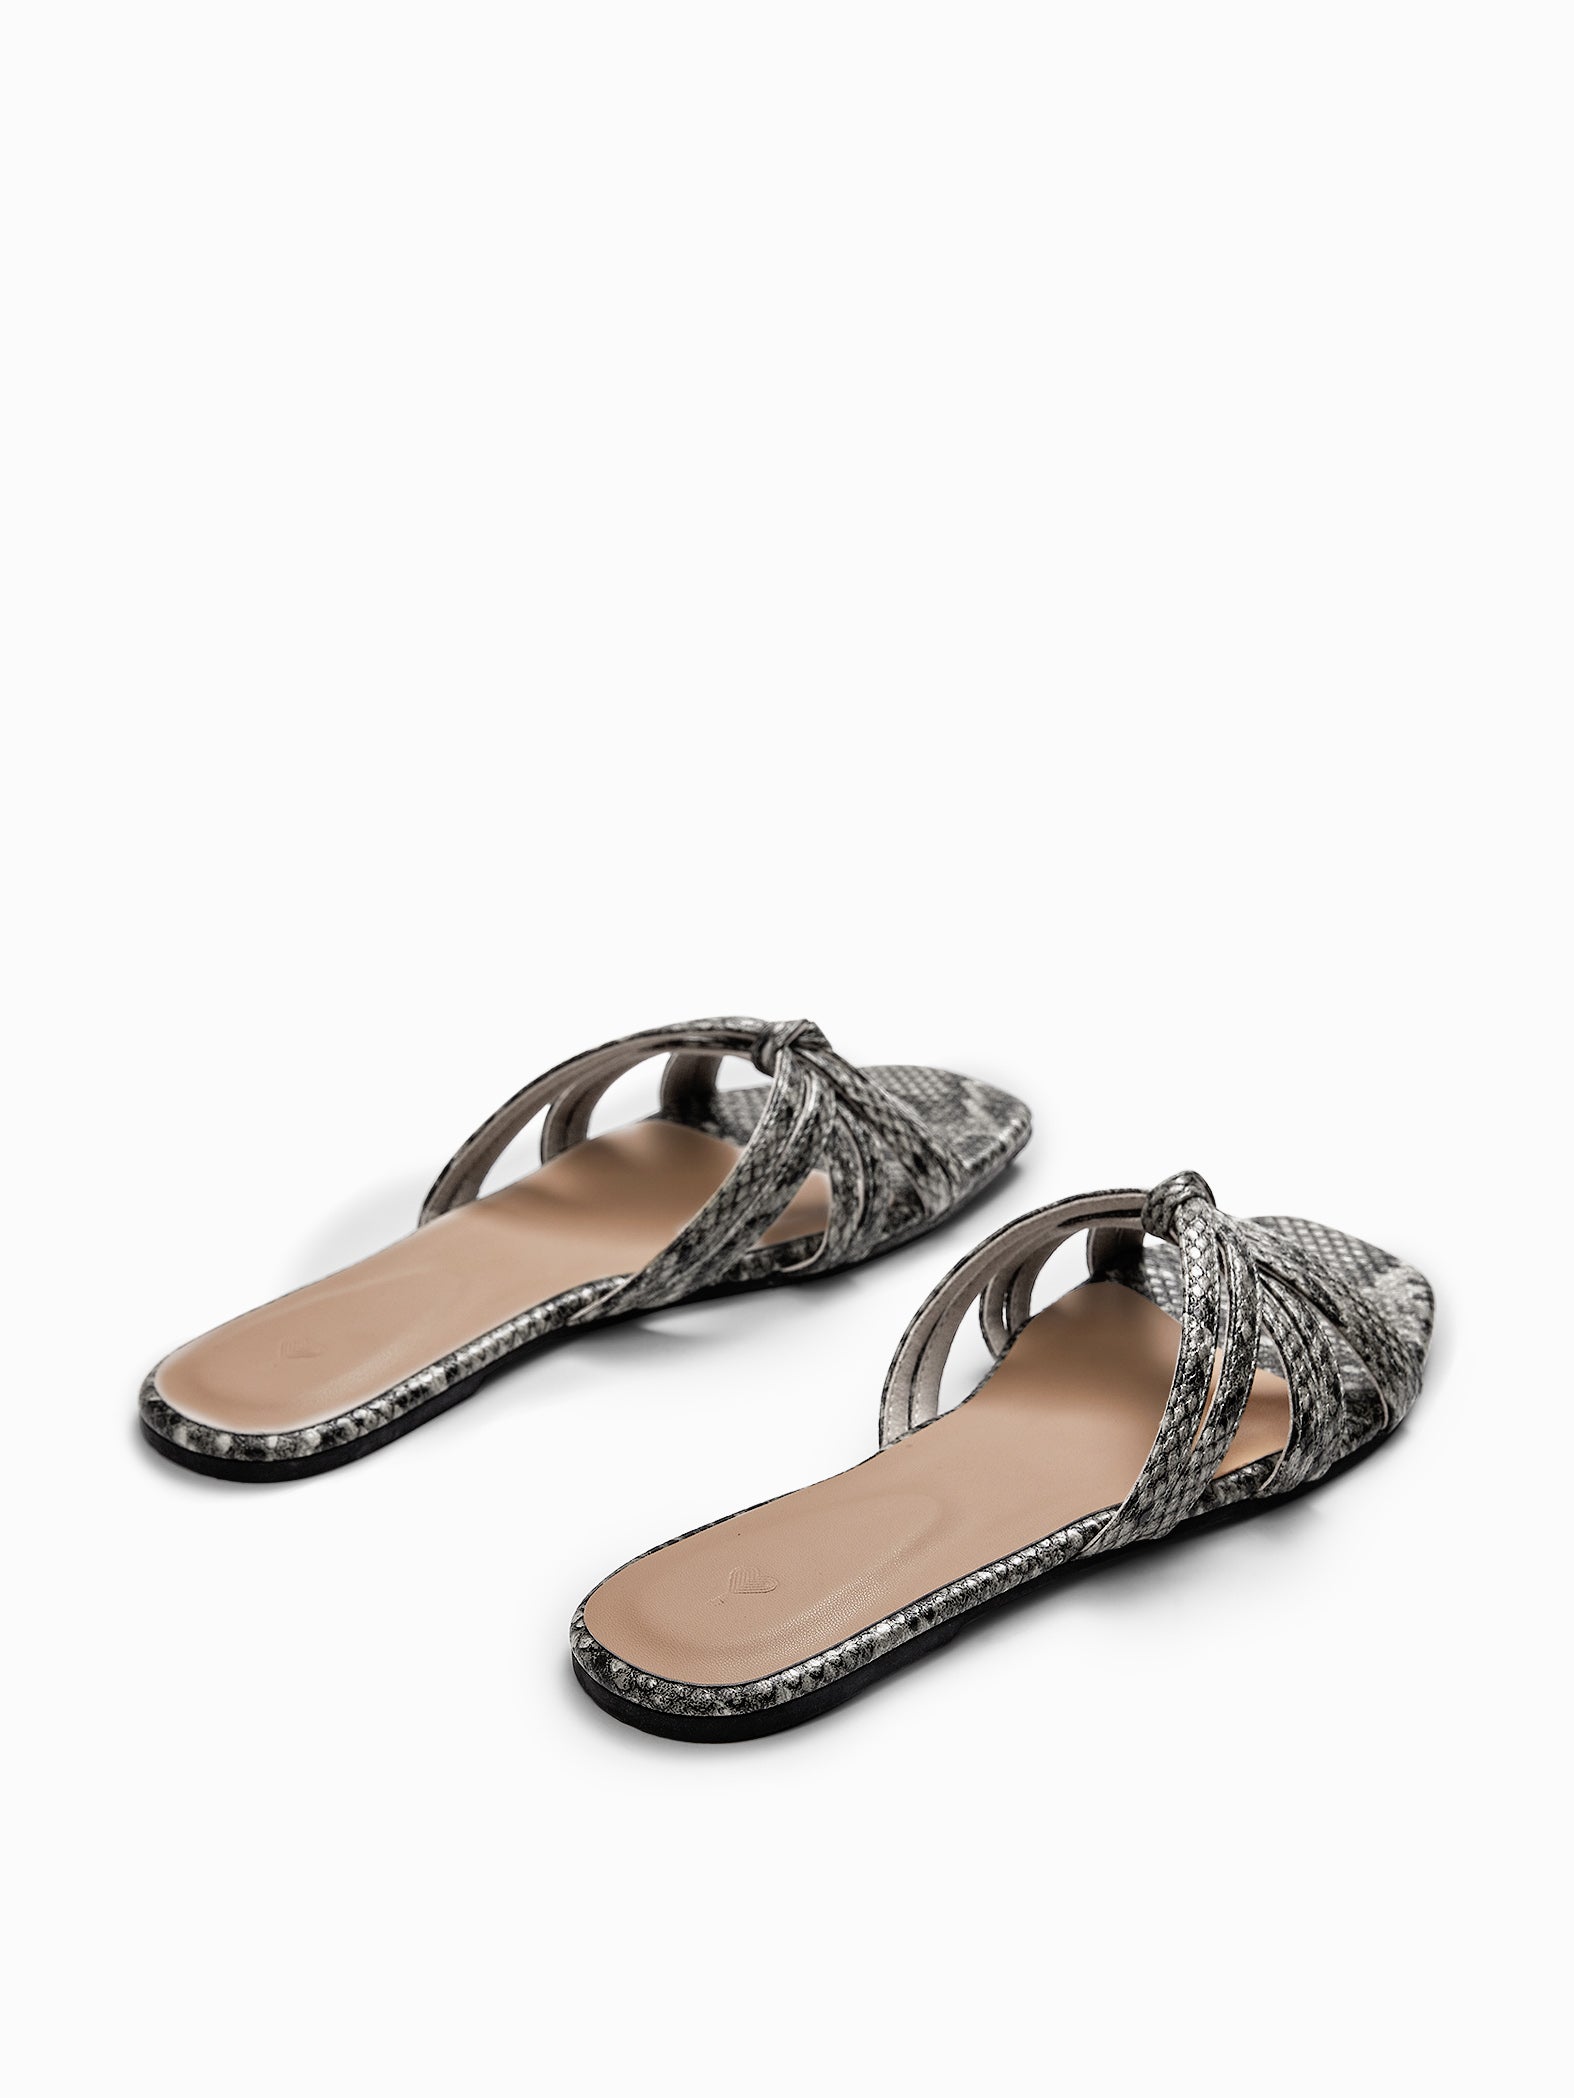 Monochrome Knotted Textured Flats